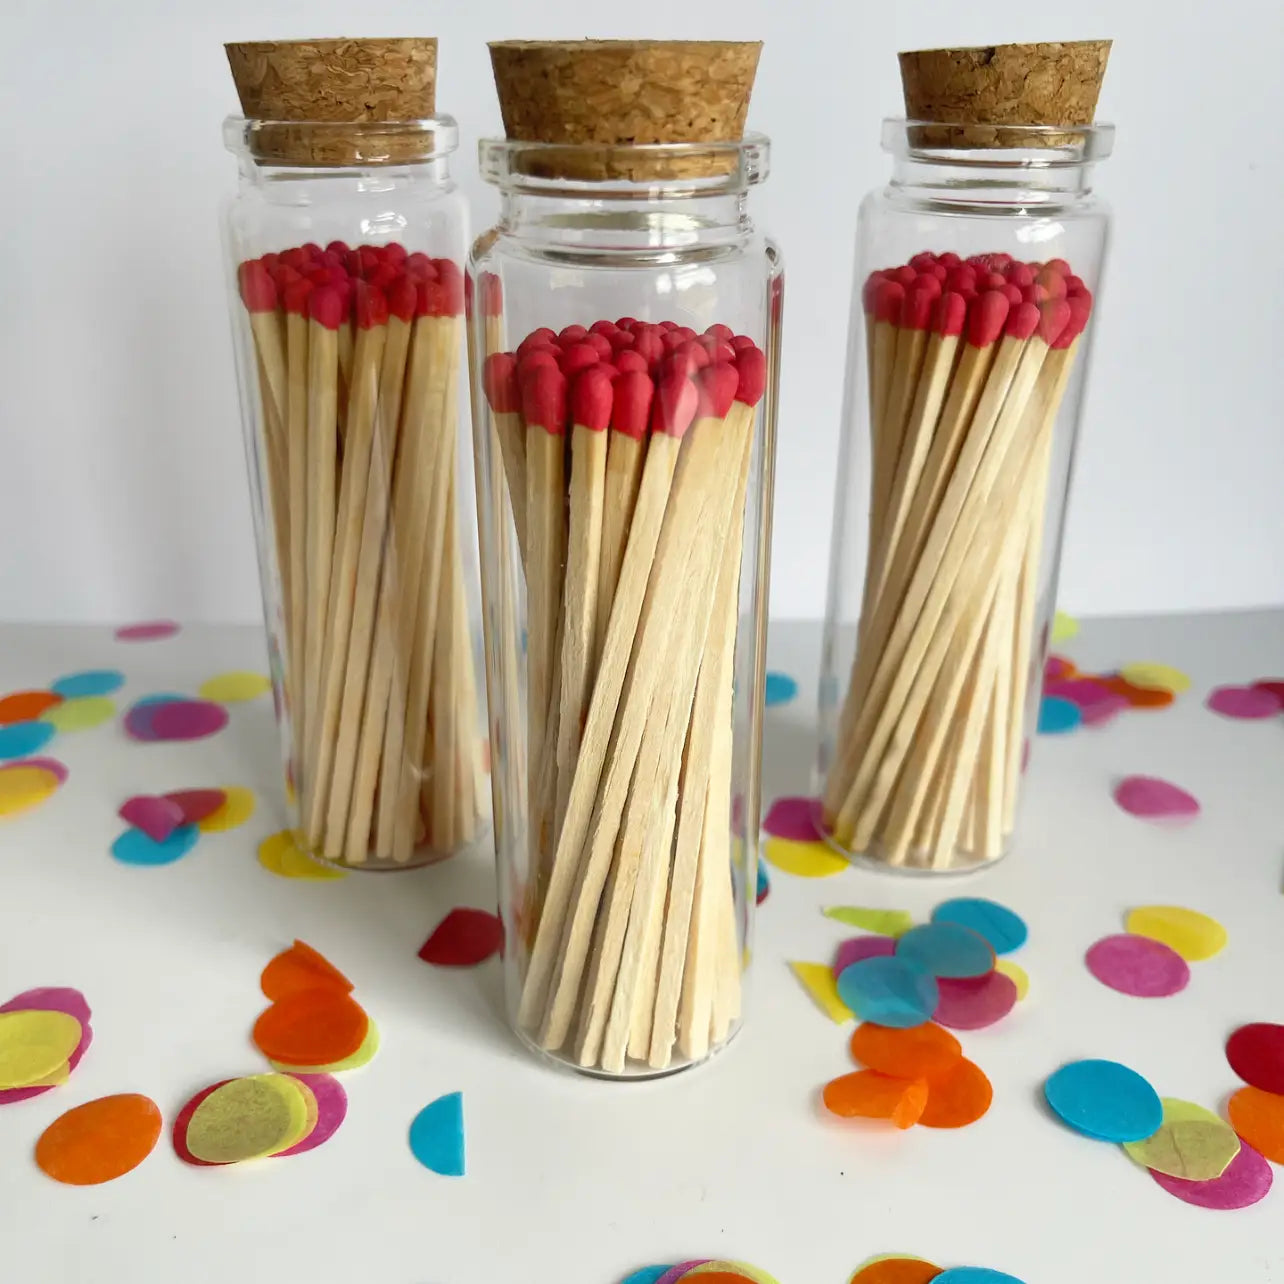 Jar of Long Red Matches